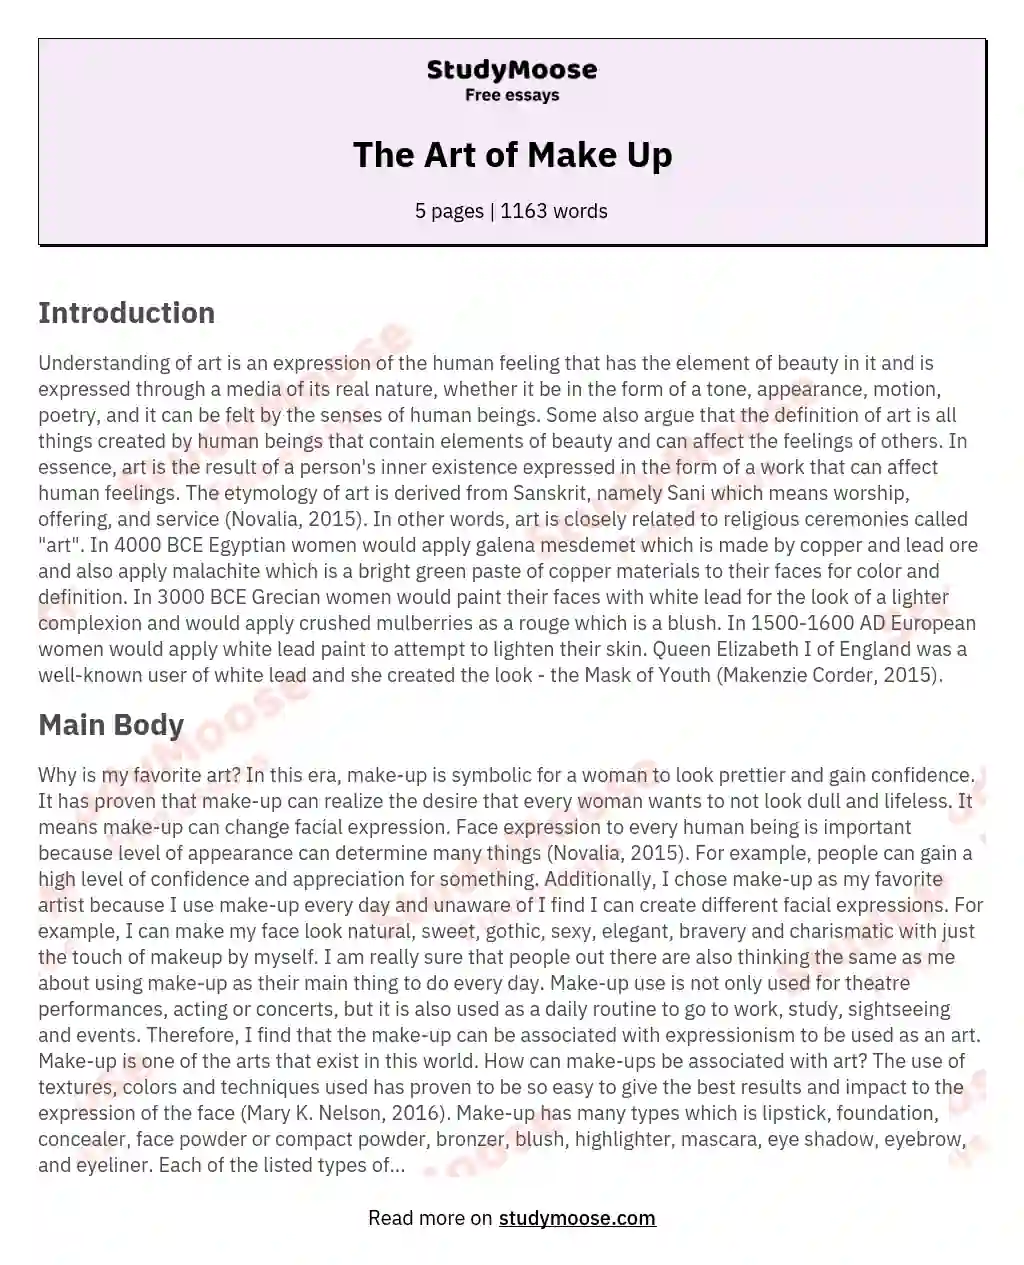 The Art of Make Up essay